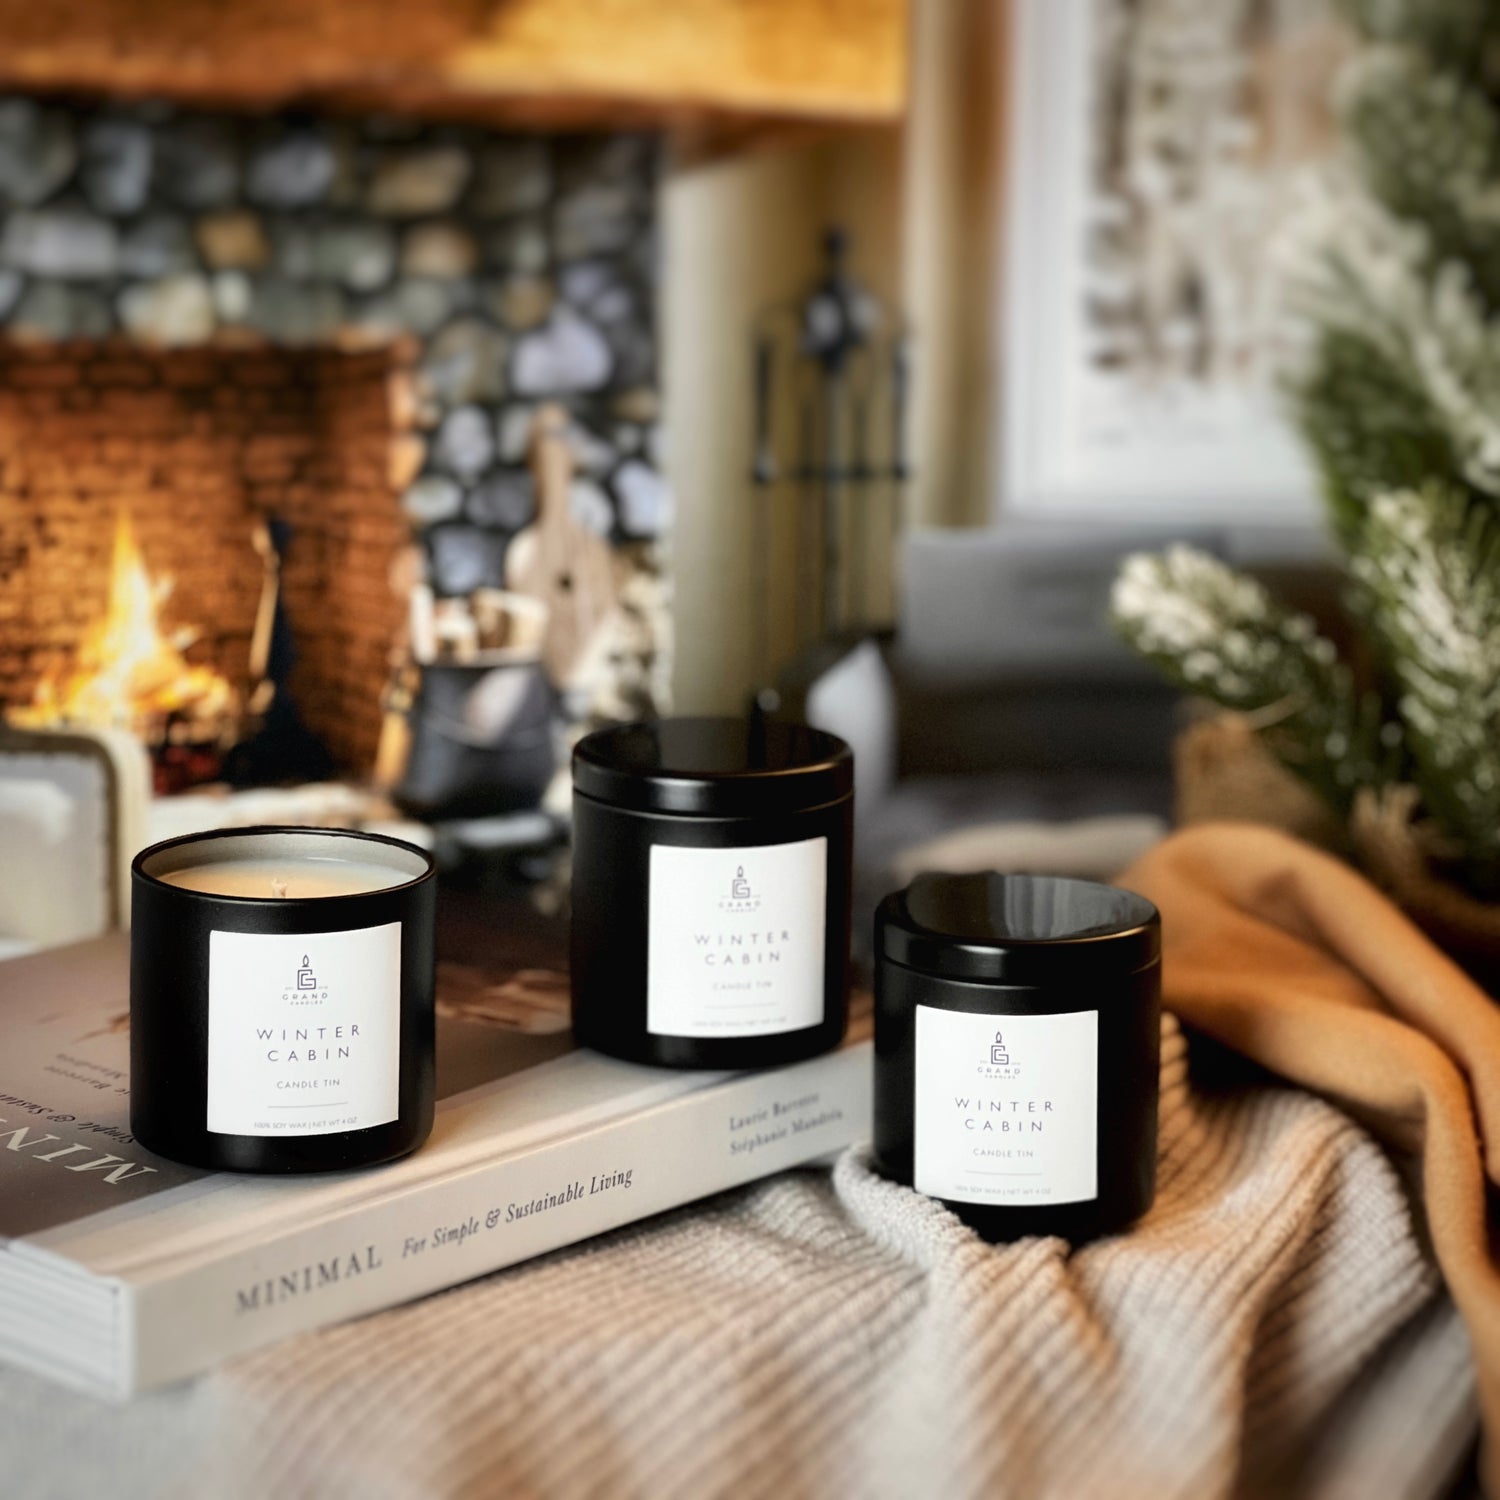 Winter Cabin Candle